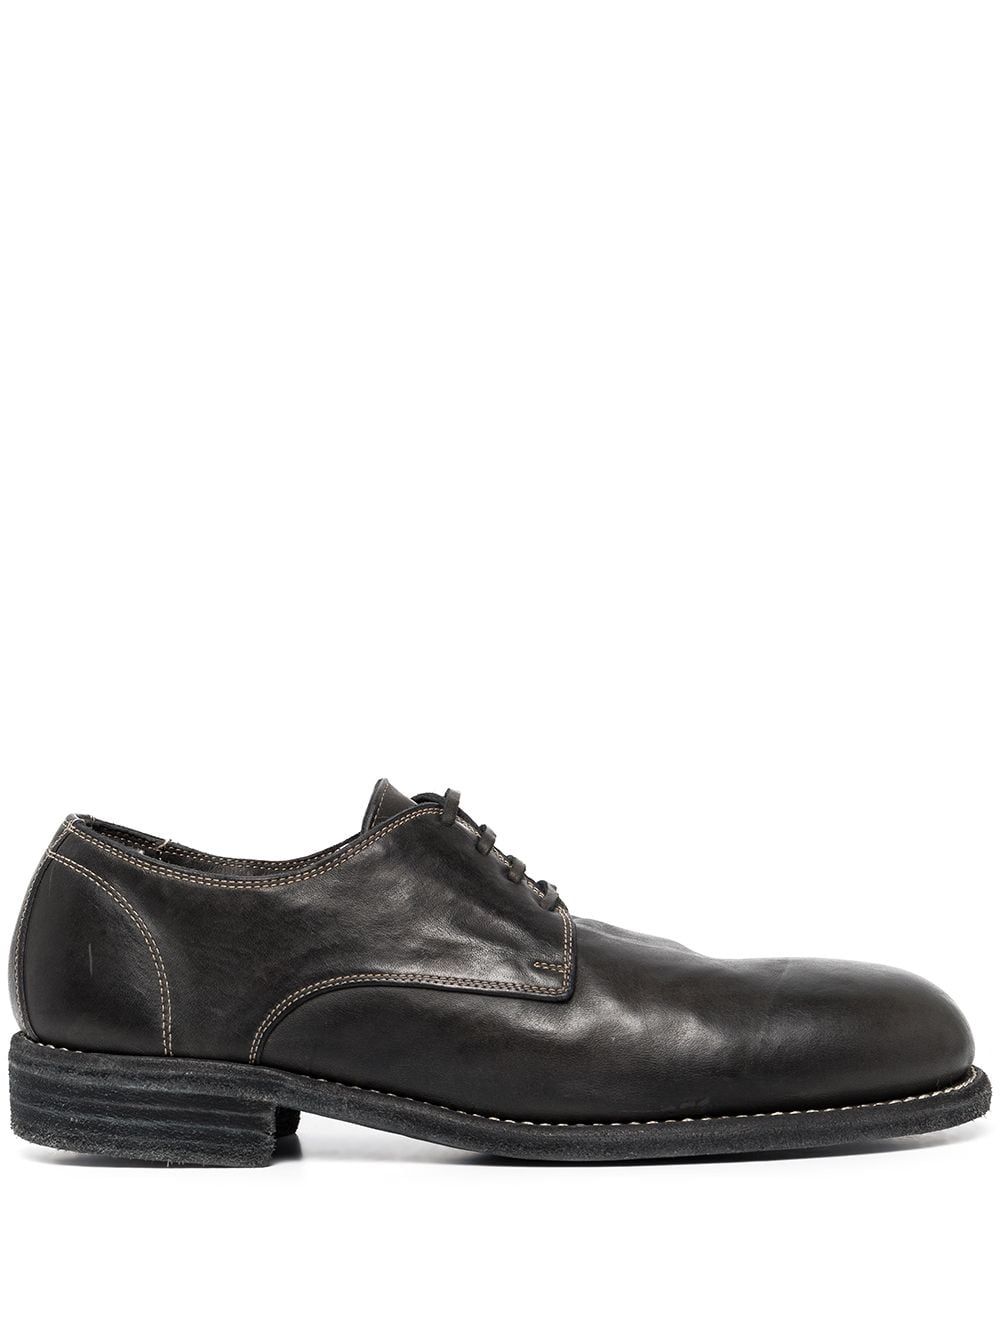 GUIDI 992 LEATHER DERBY SHOES